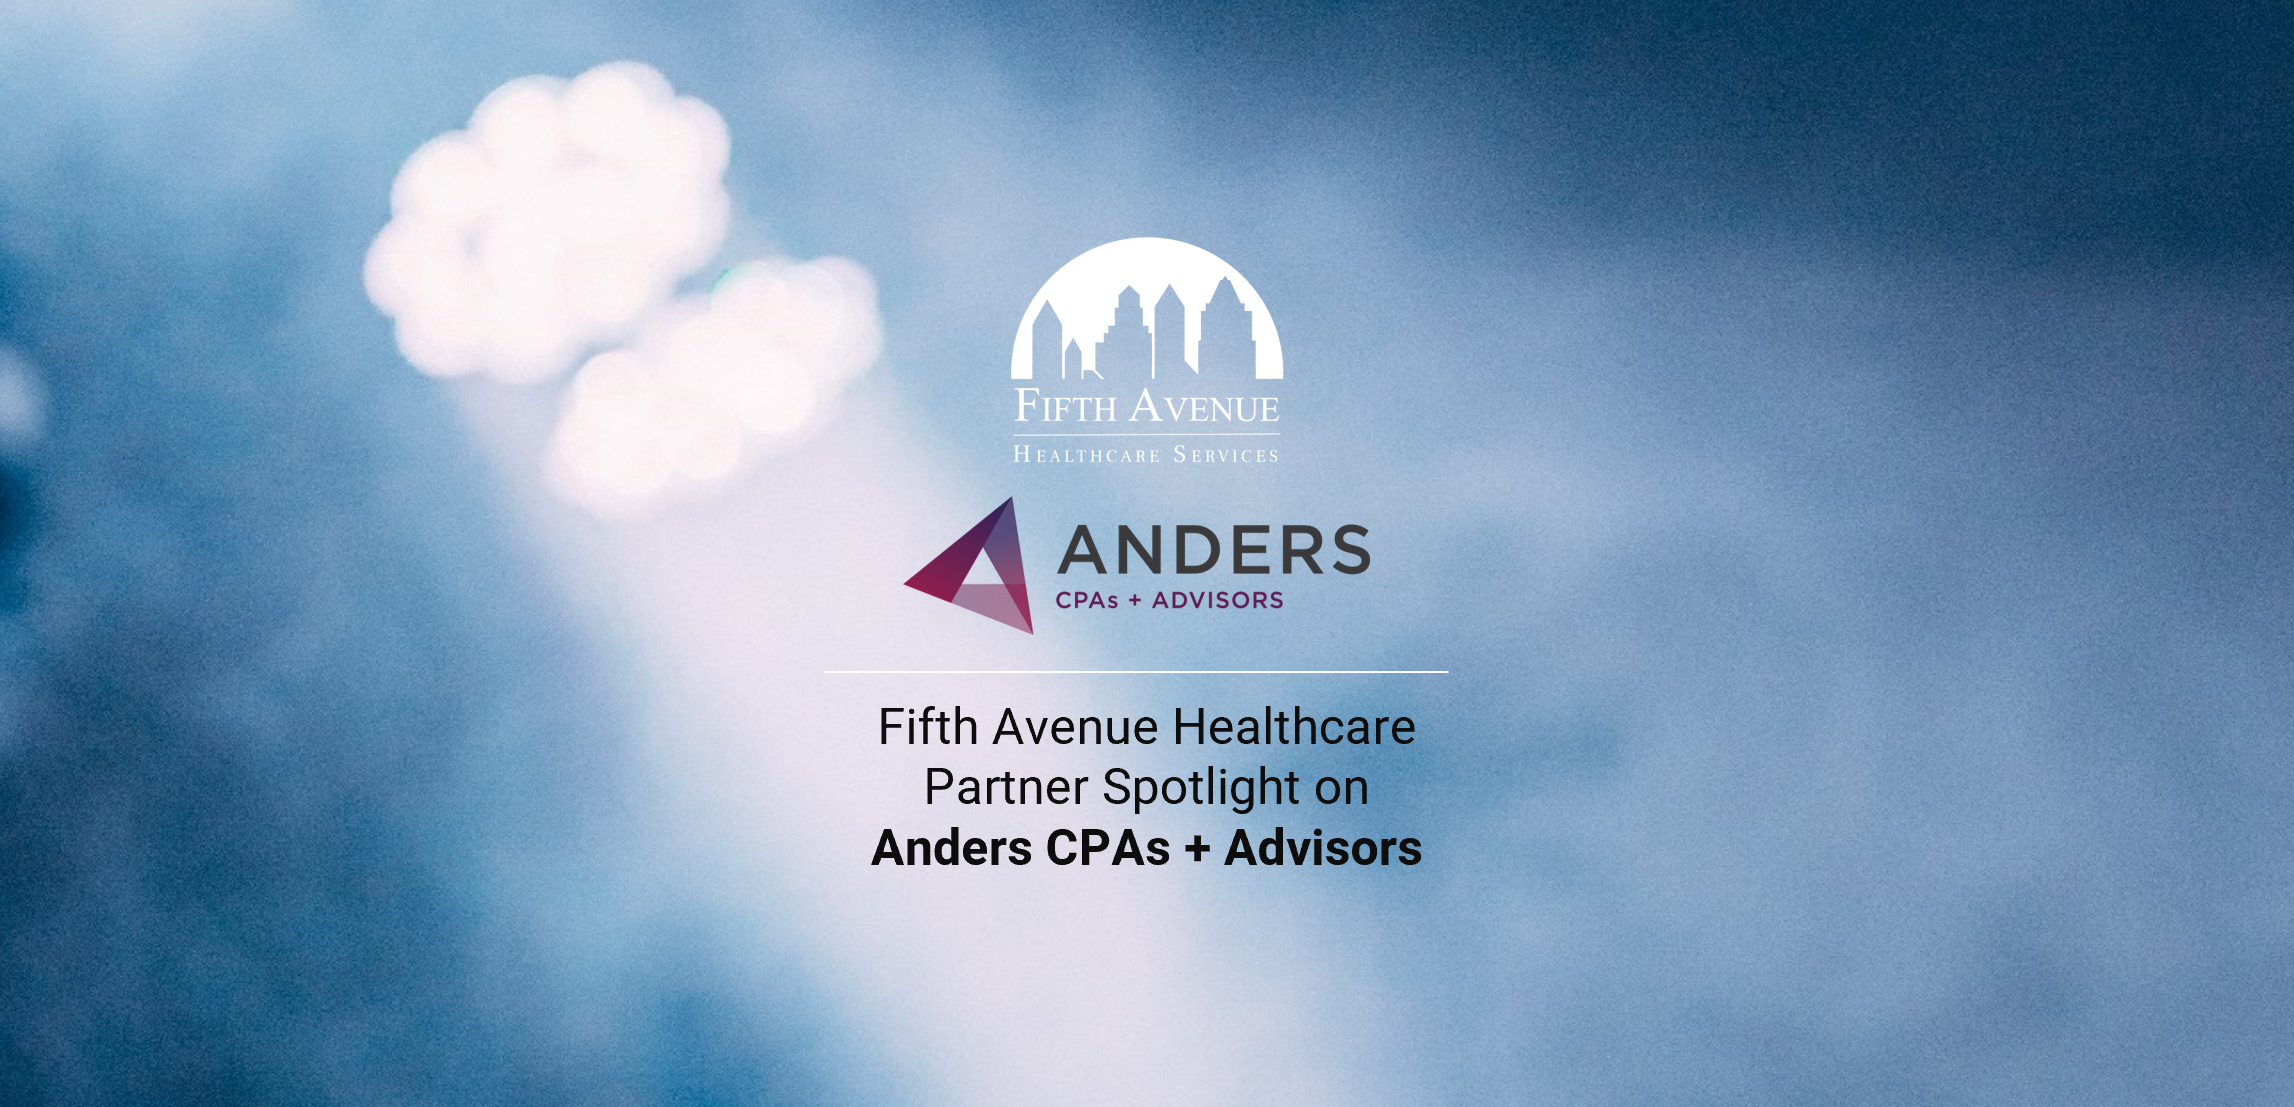 Anders CPA Partnership Spotlight with Fifth Avenue Healthcare Services